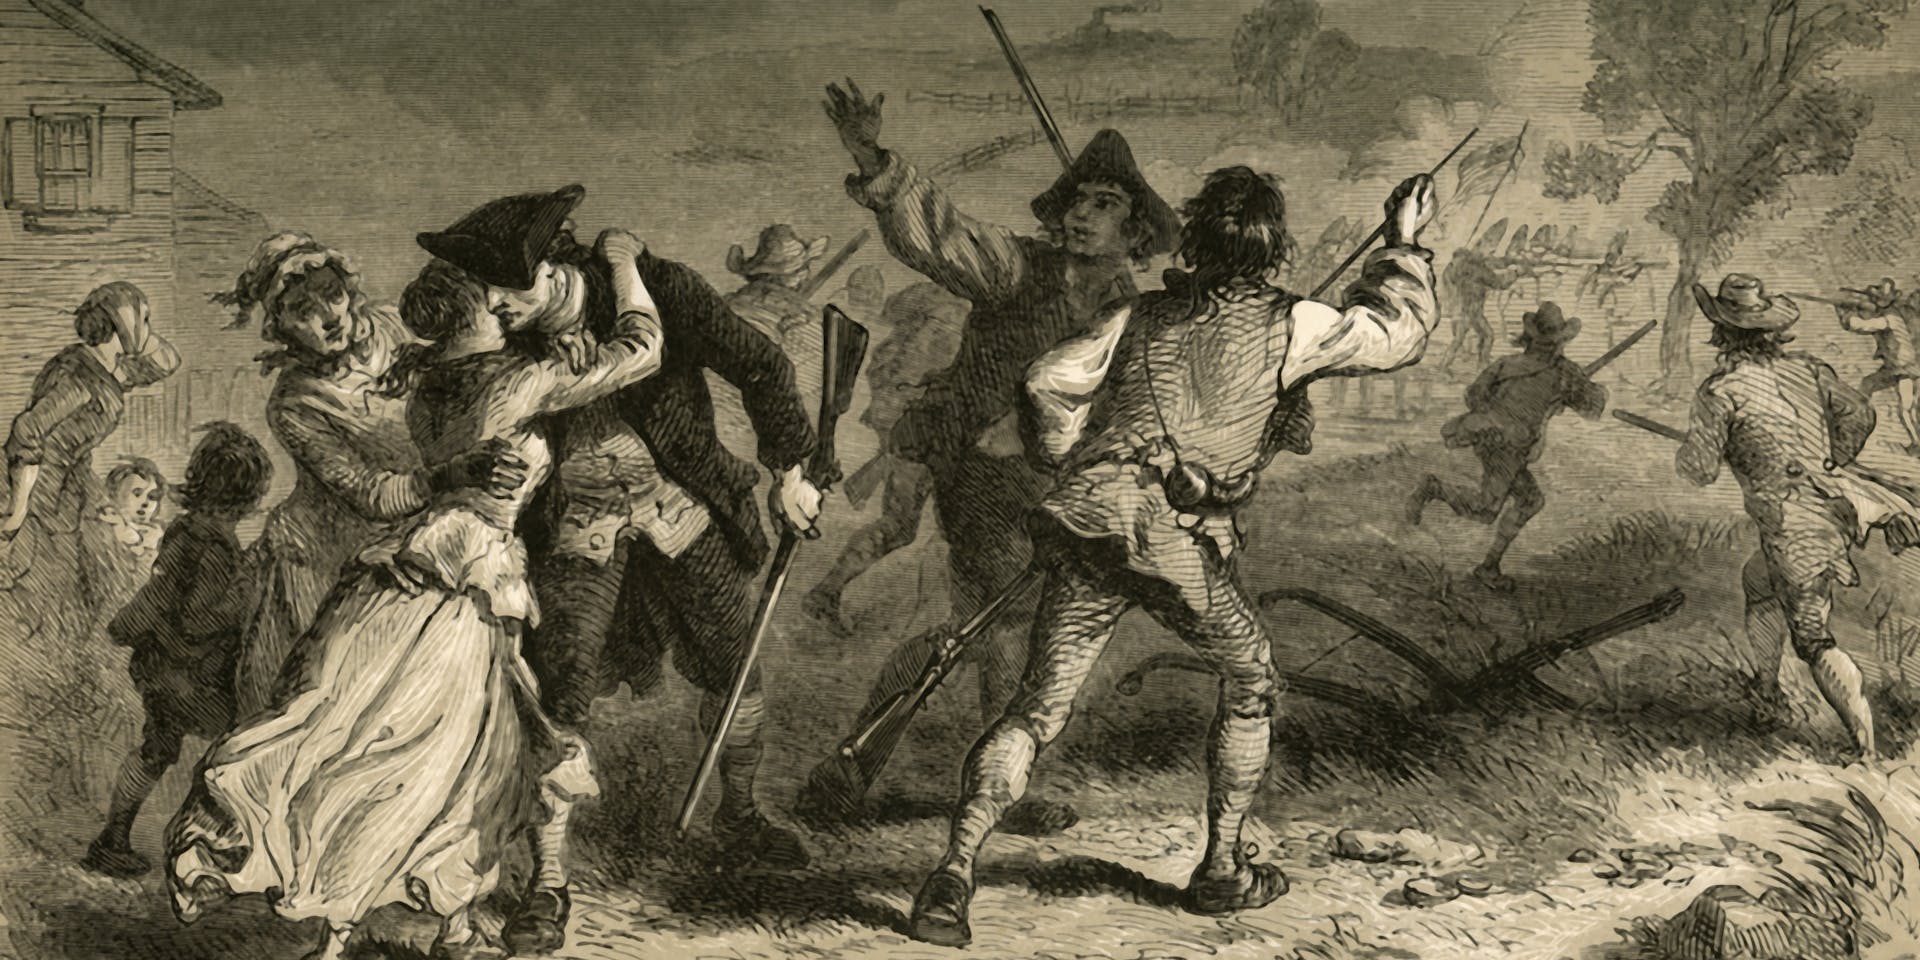 How fake foreign news fed political fervor and led to the American Revolution